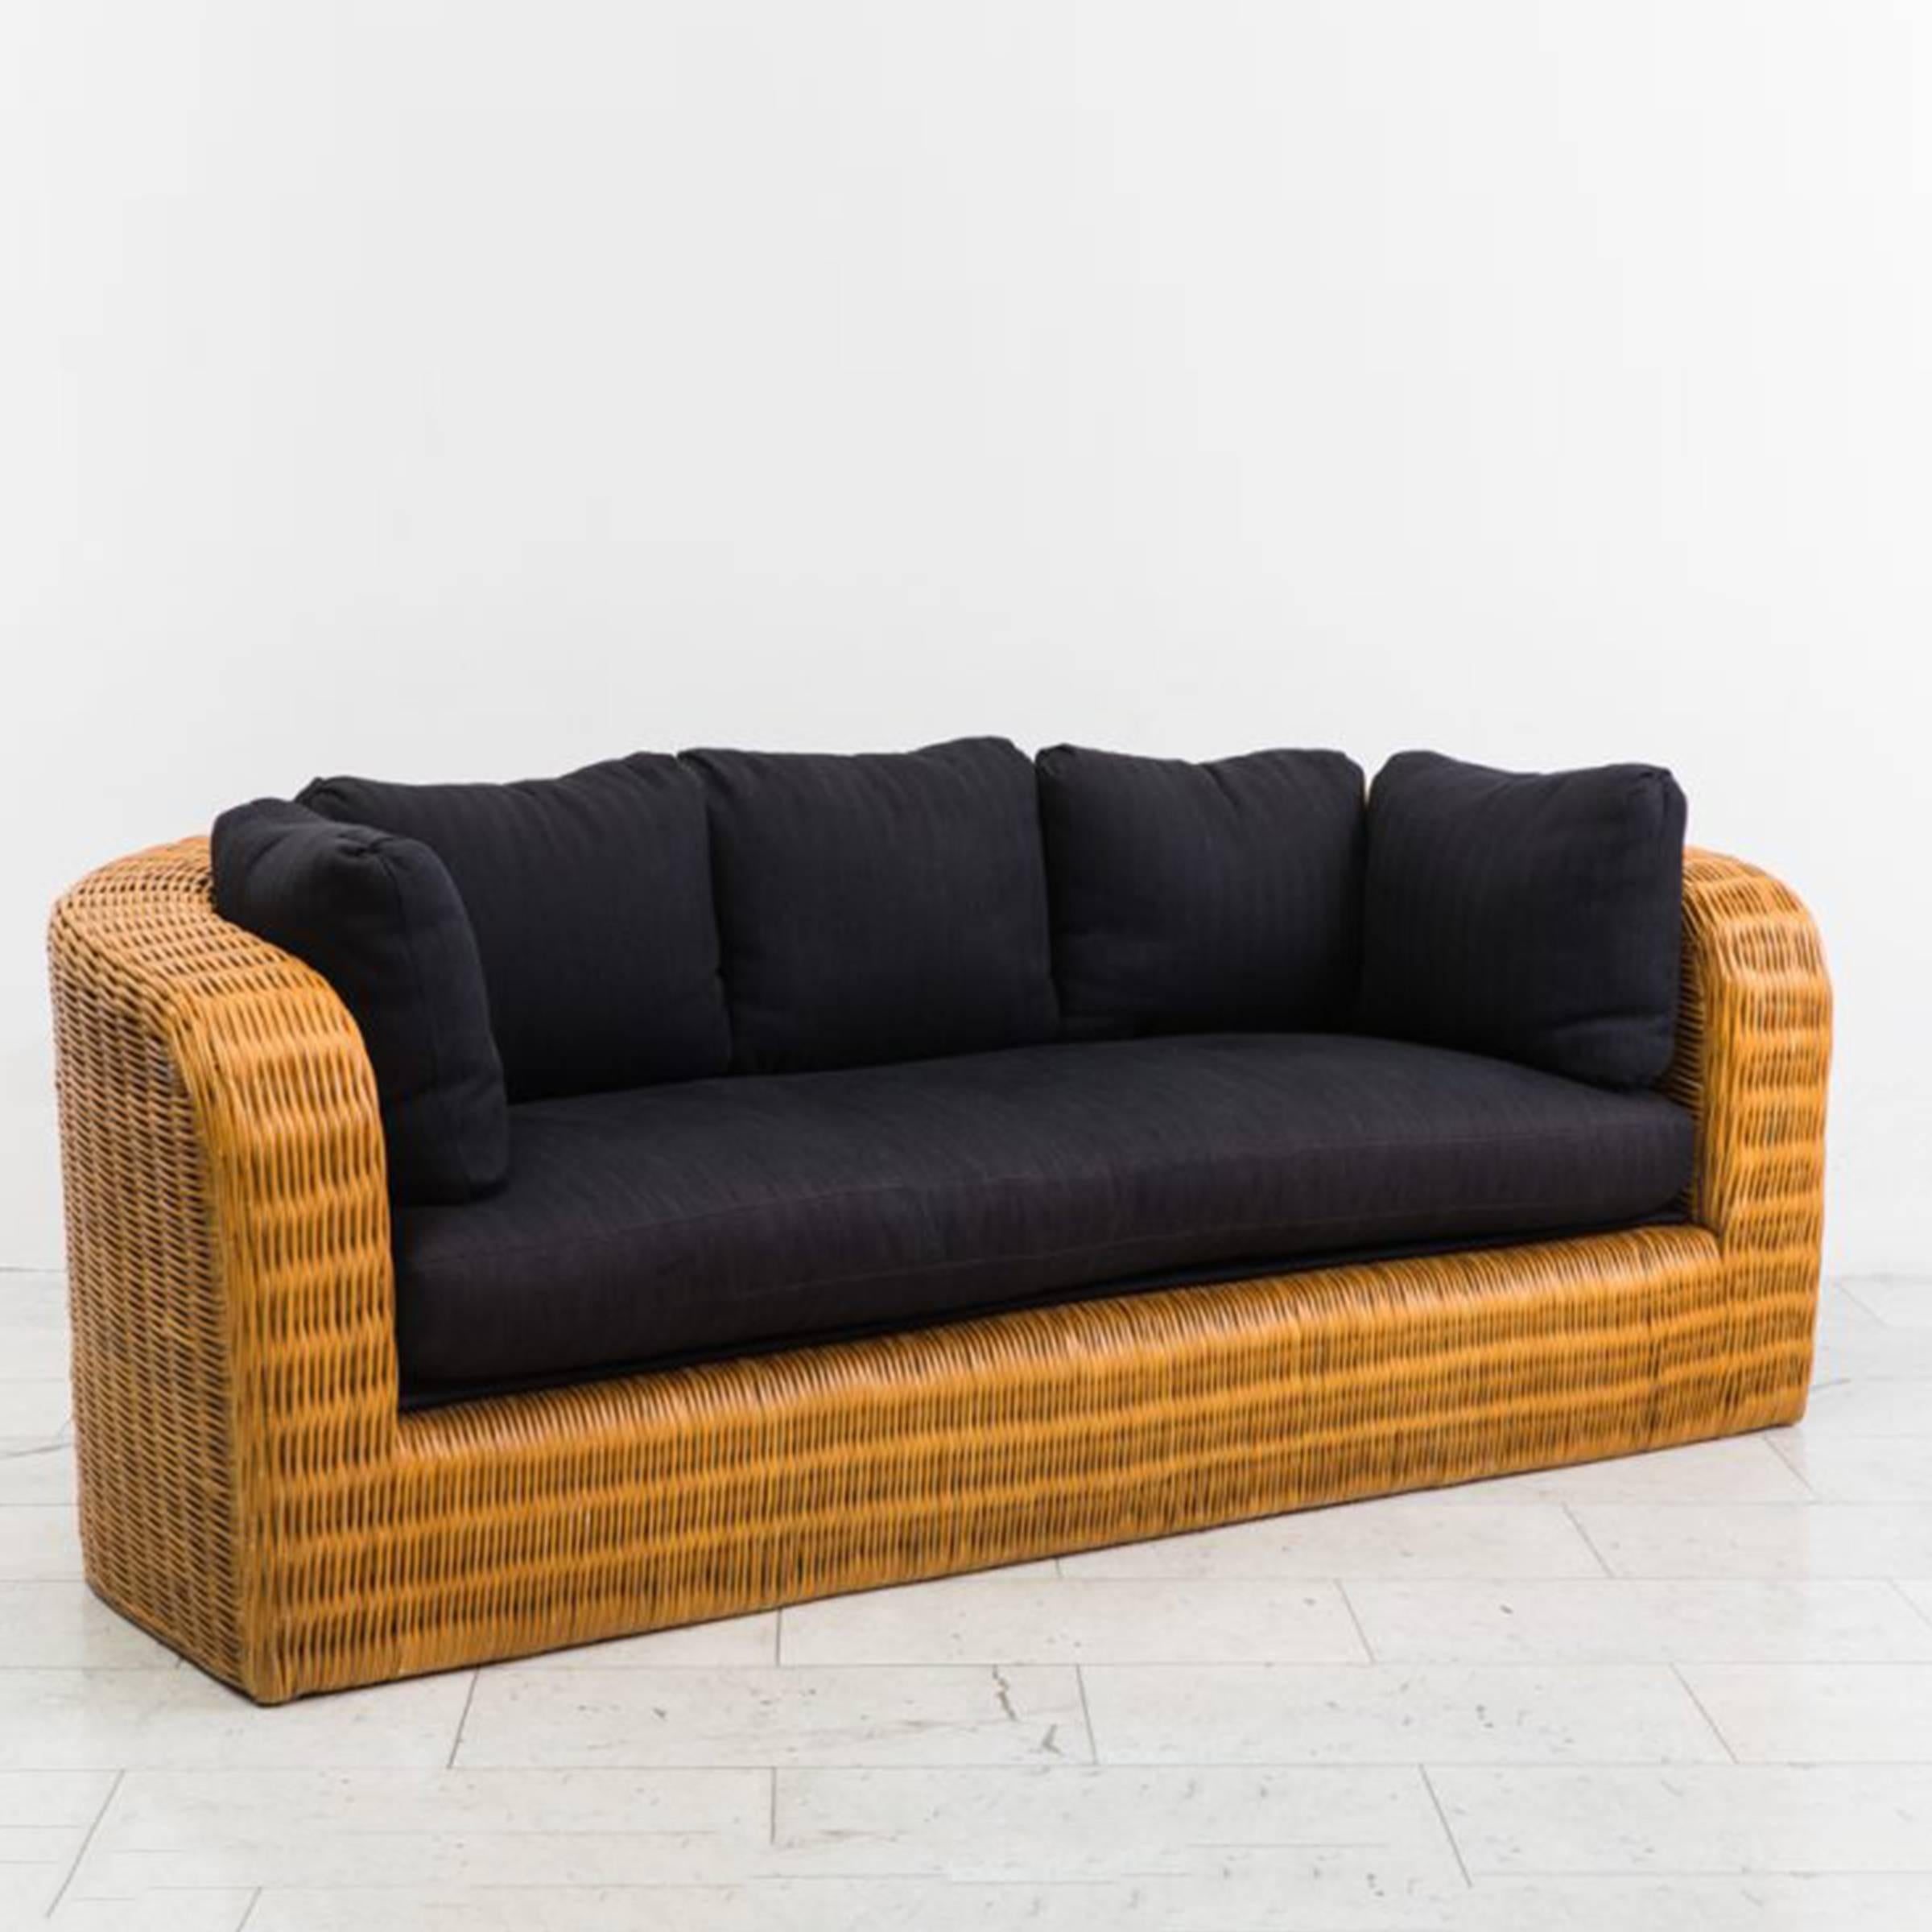 This gorgeous rounded-back Karl Springer Pullman Sofa was designed in 1985.  Constructed of bamboo and wicker the sofa features Springer’s penchant for simple, elegant lines, excellent craftsmanship and a modern aesthetic.

Dimensions: 31h x 85w x